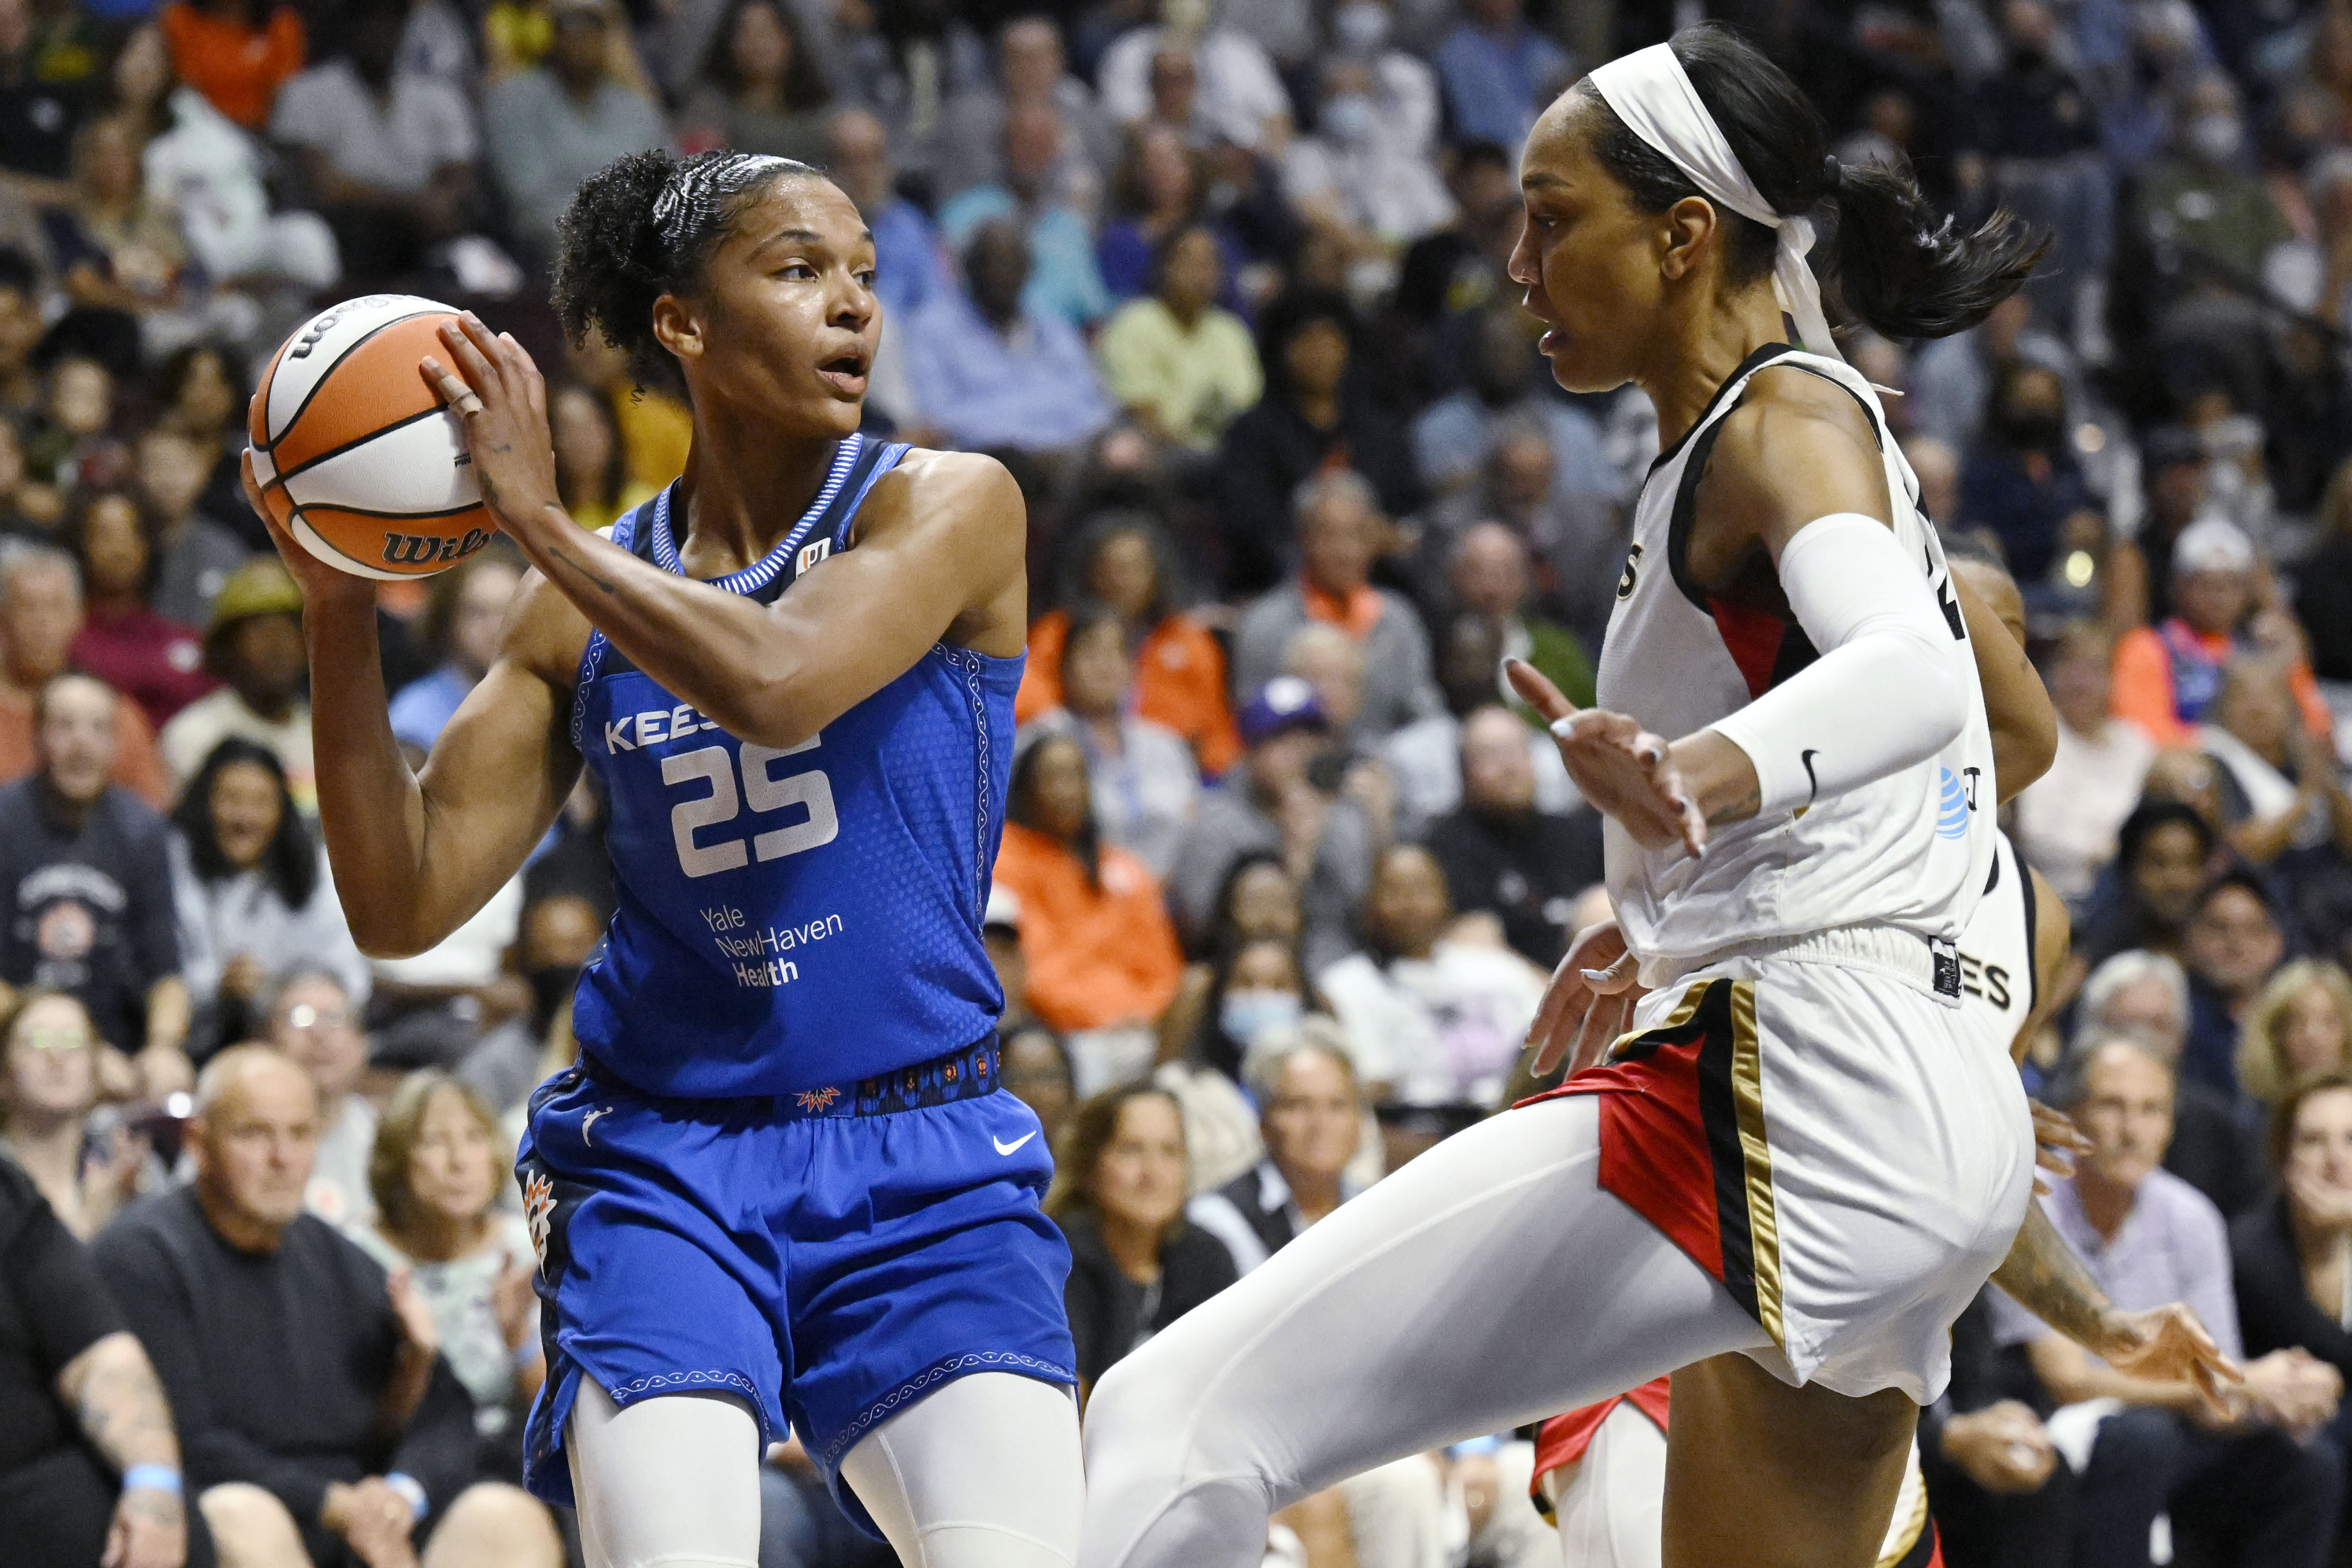 WNBA Free Agency: 3 potential destinations for Nneka Ogwumike